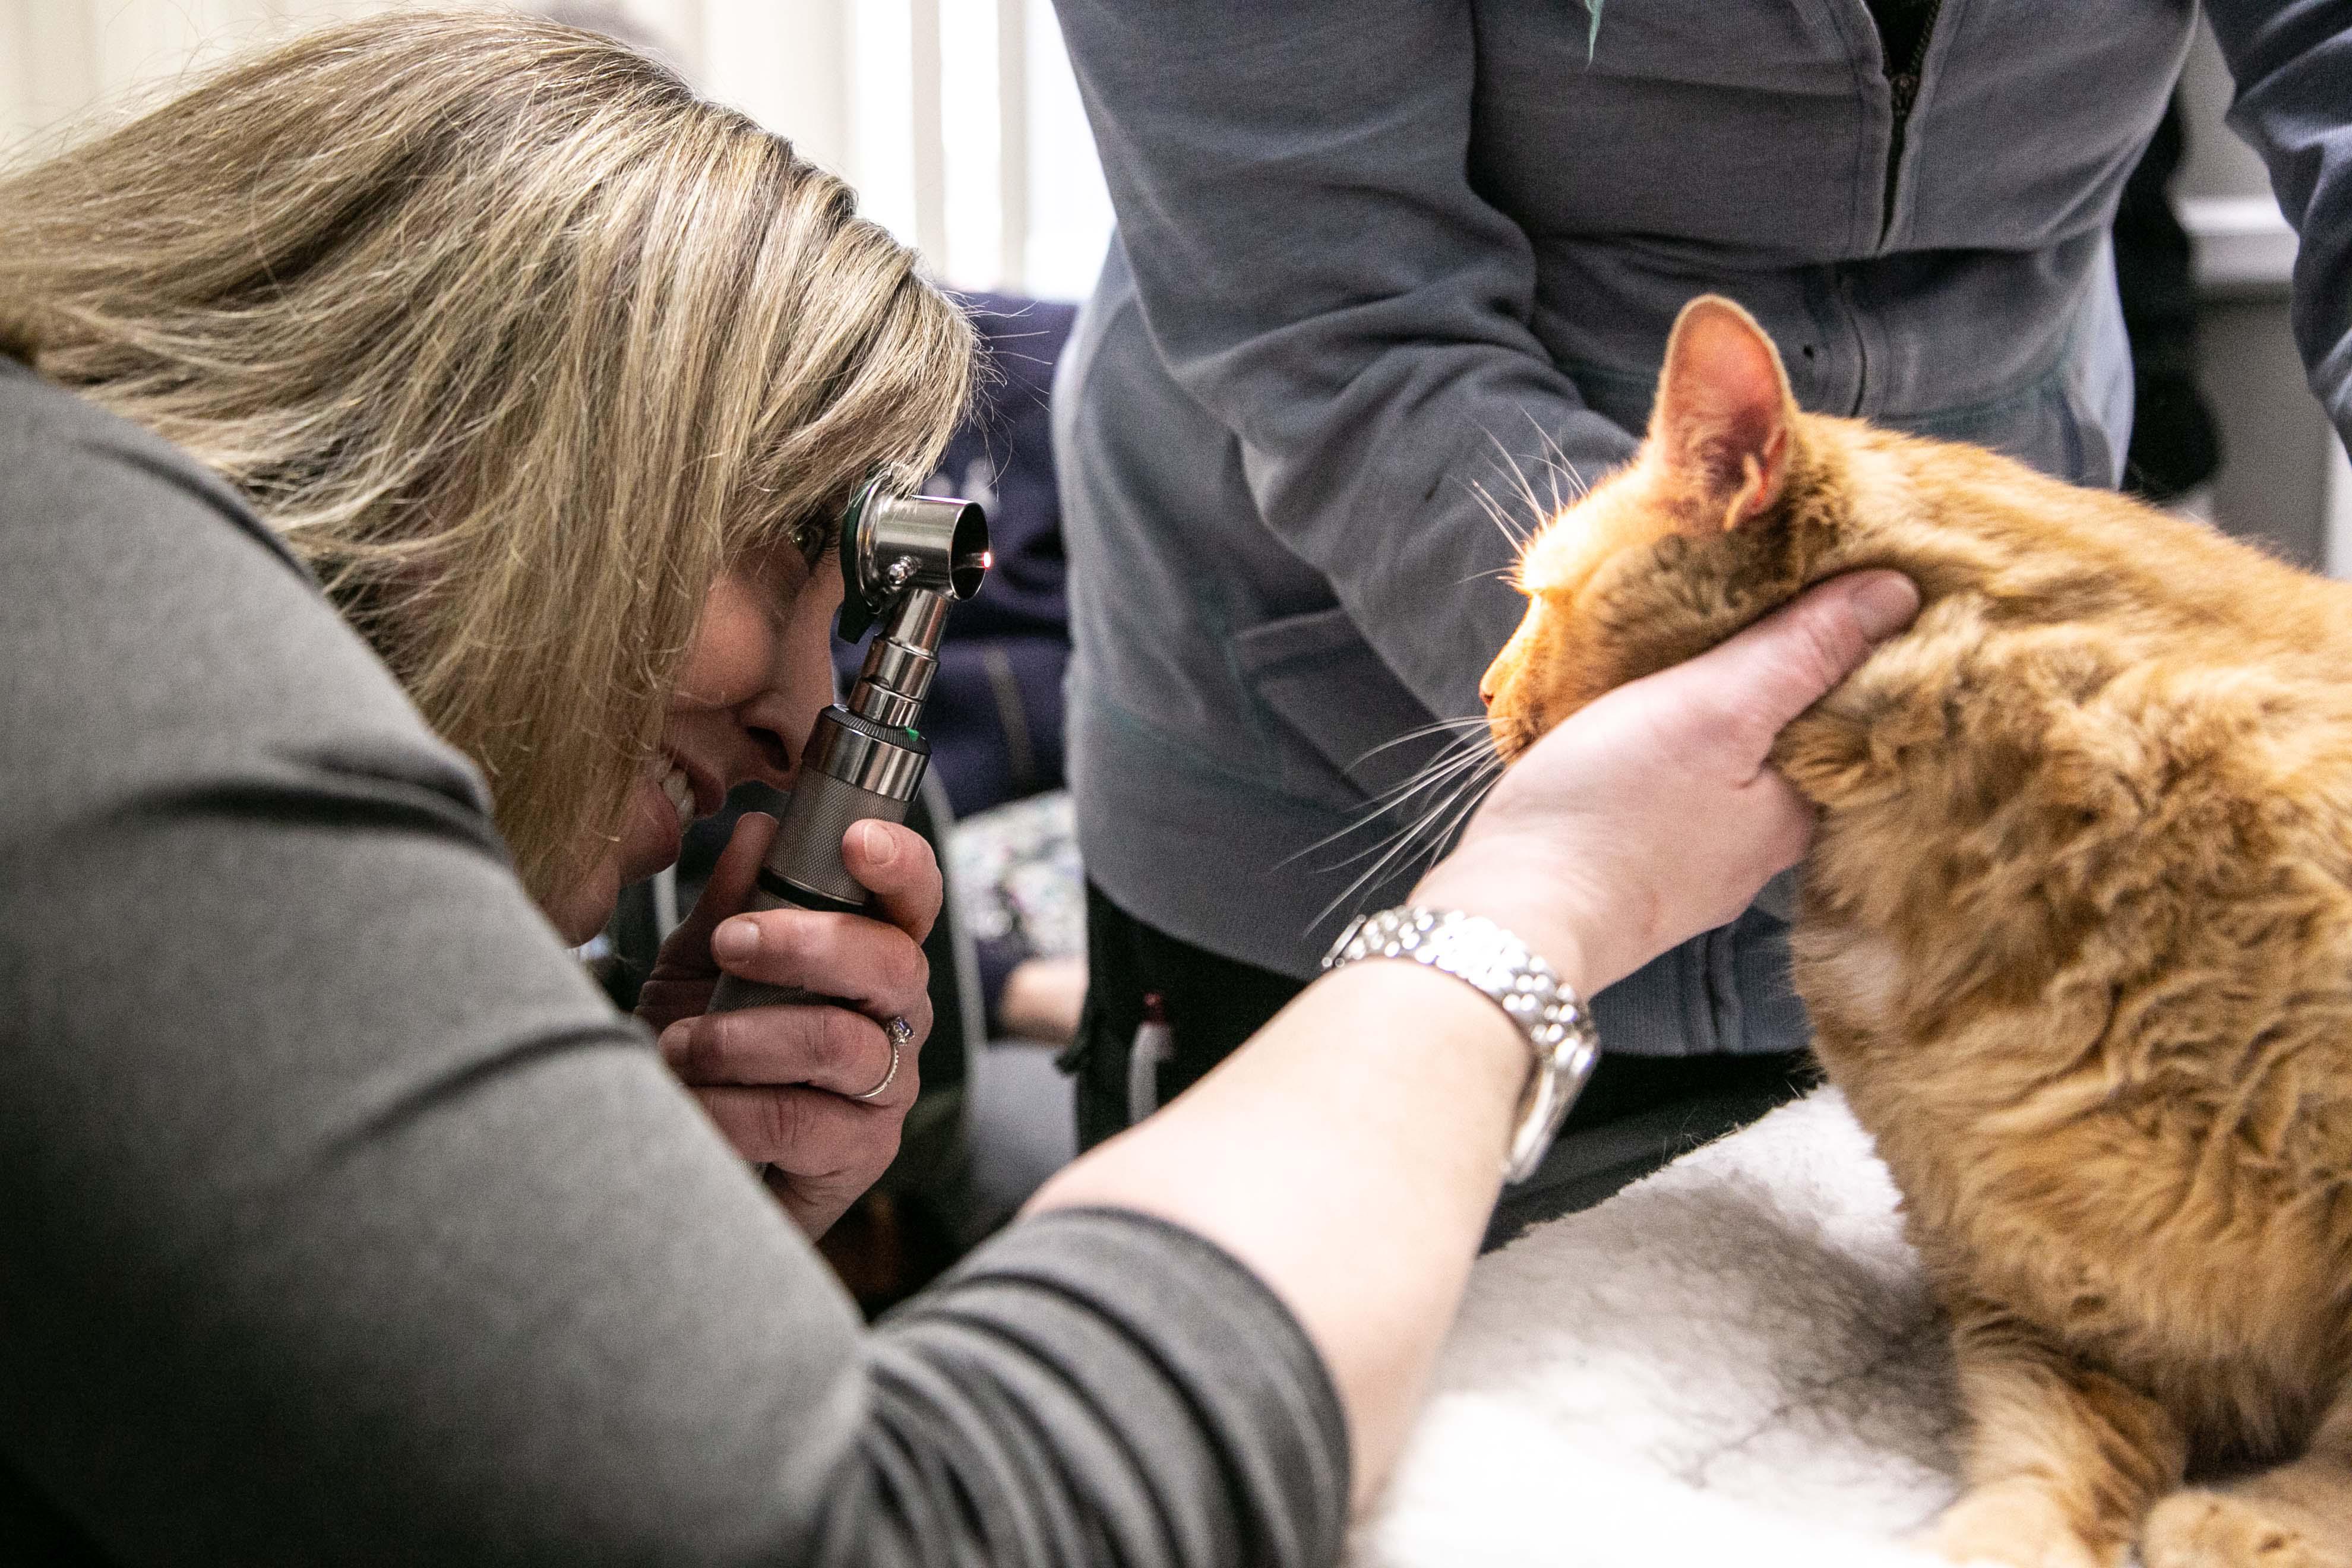 Dr. Morganthall, better known as Dr. Jess, is performing a full physical exam on one of her adorable feline patients. Here, she's checking the eyes for any unusual coloration, discharge, proper light response, and more.